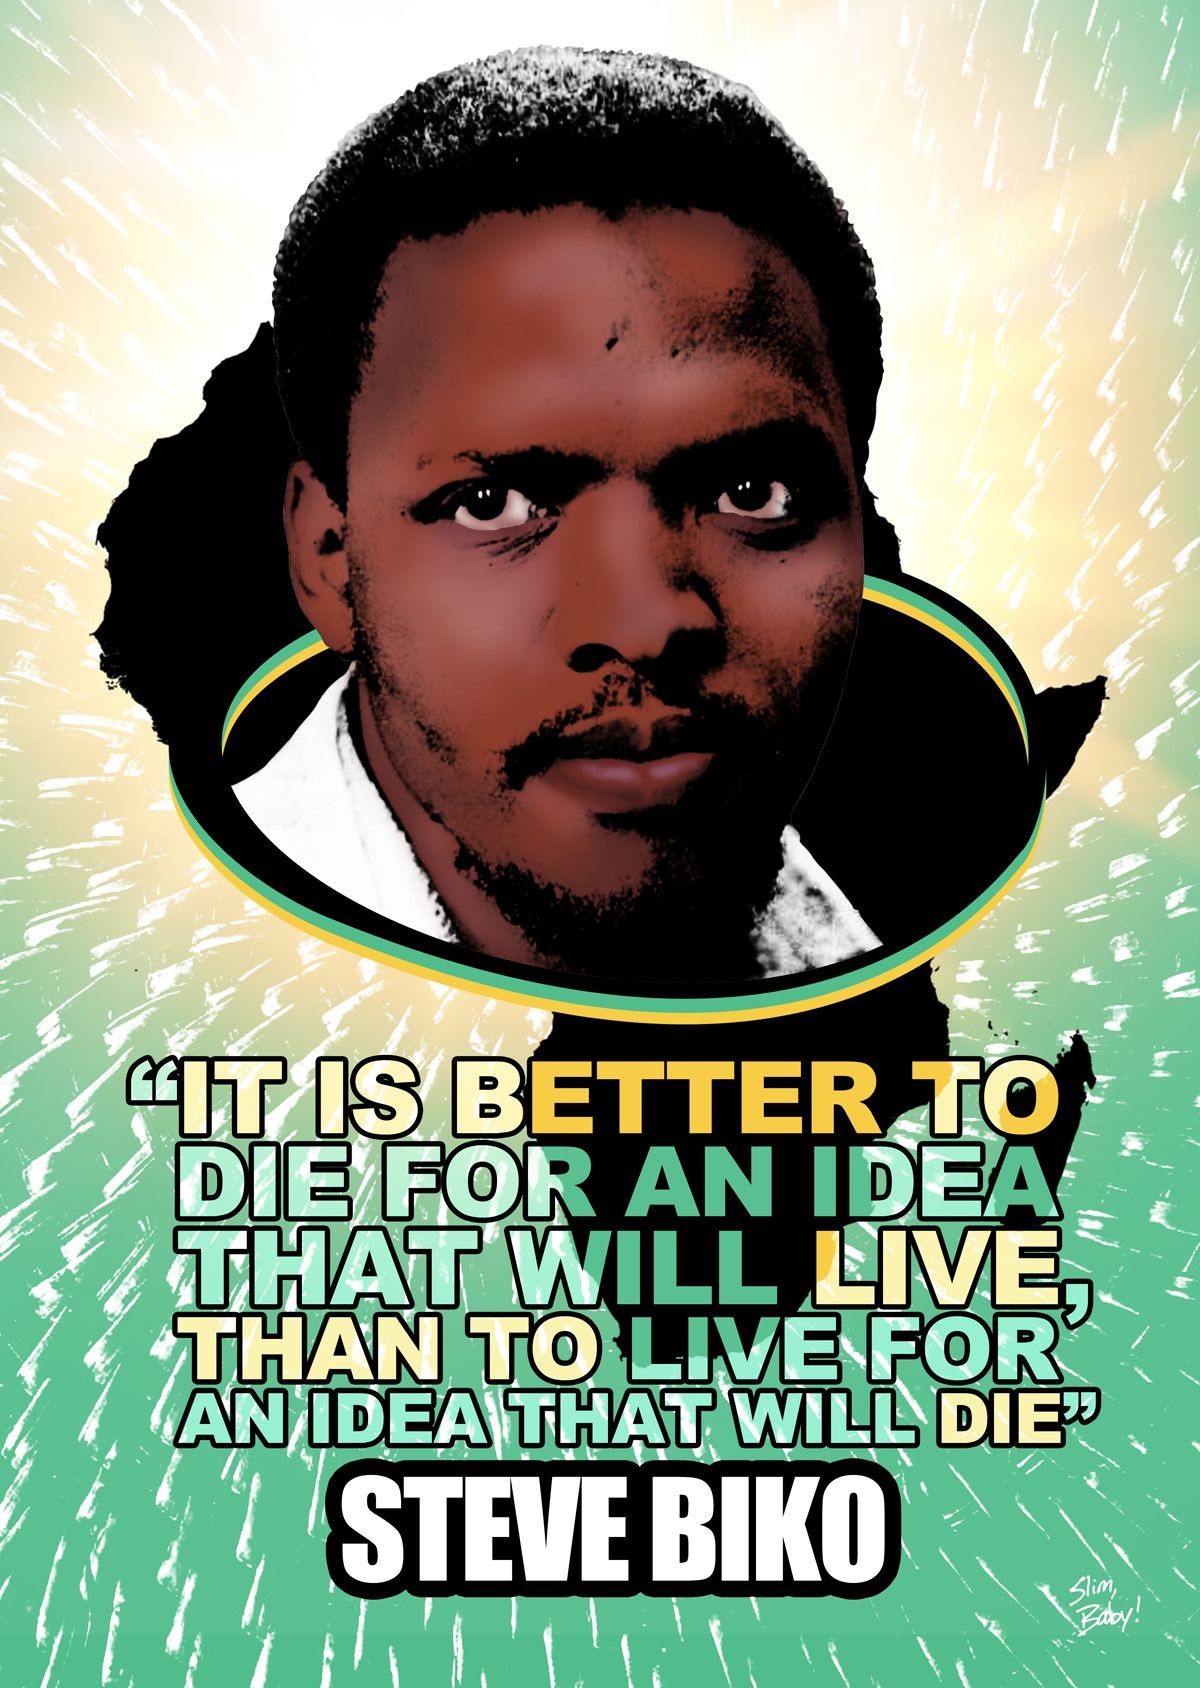 Best Kids Projects image. Steve biko, Black consciousness, African history